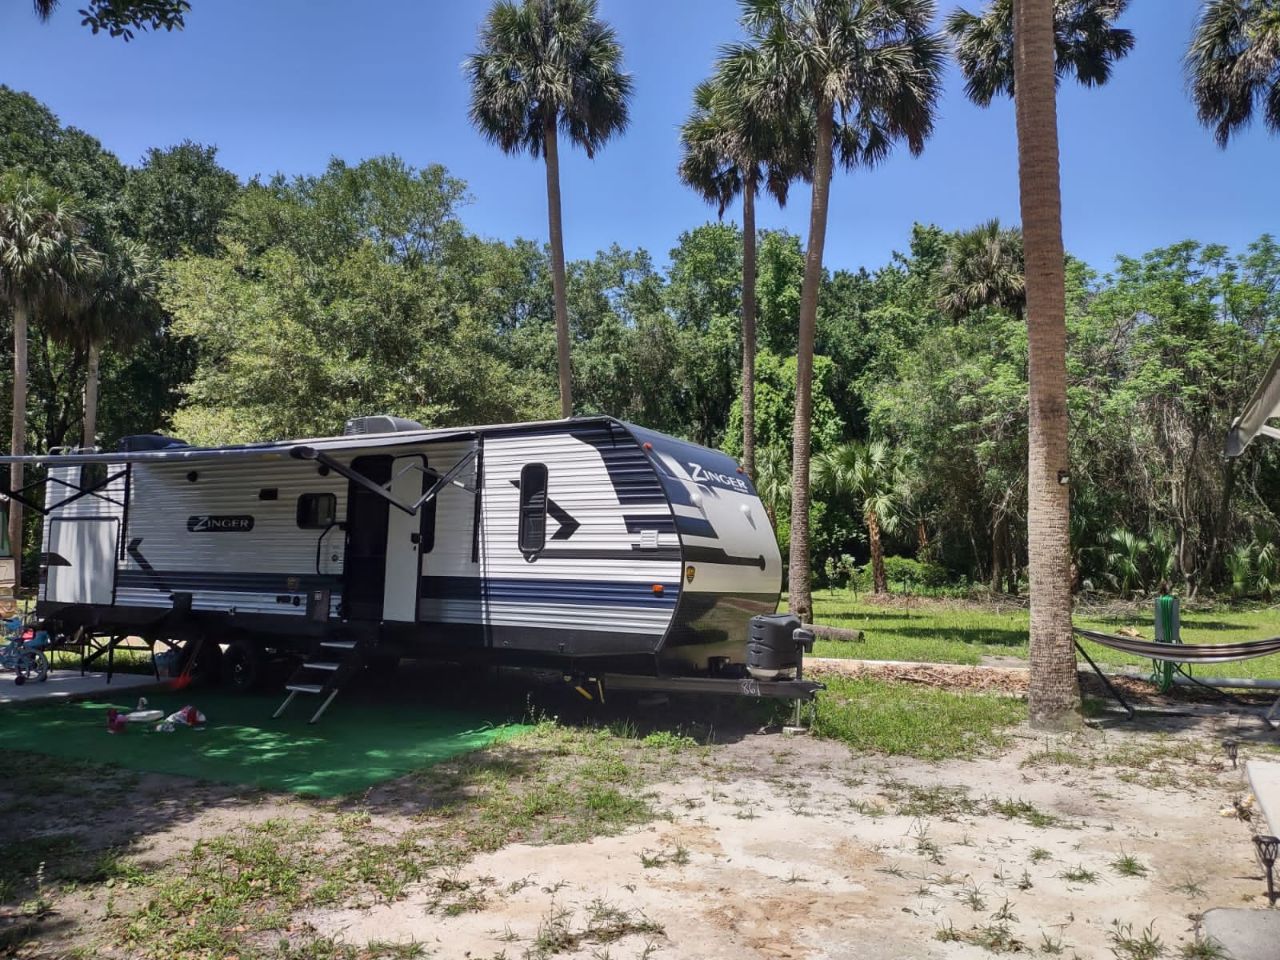 Full Hook Up RV Sites Available - Short Term and Long Term!